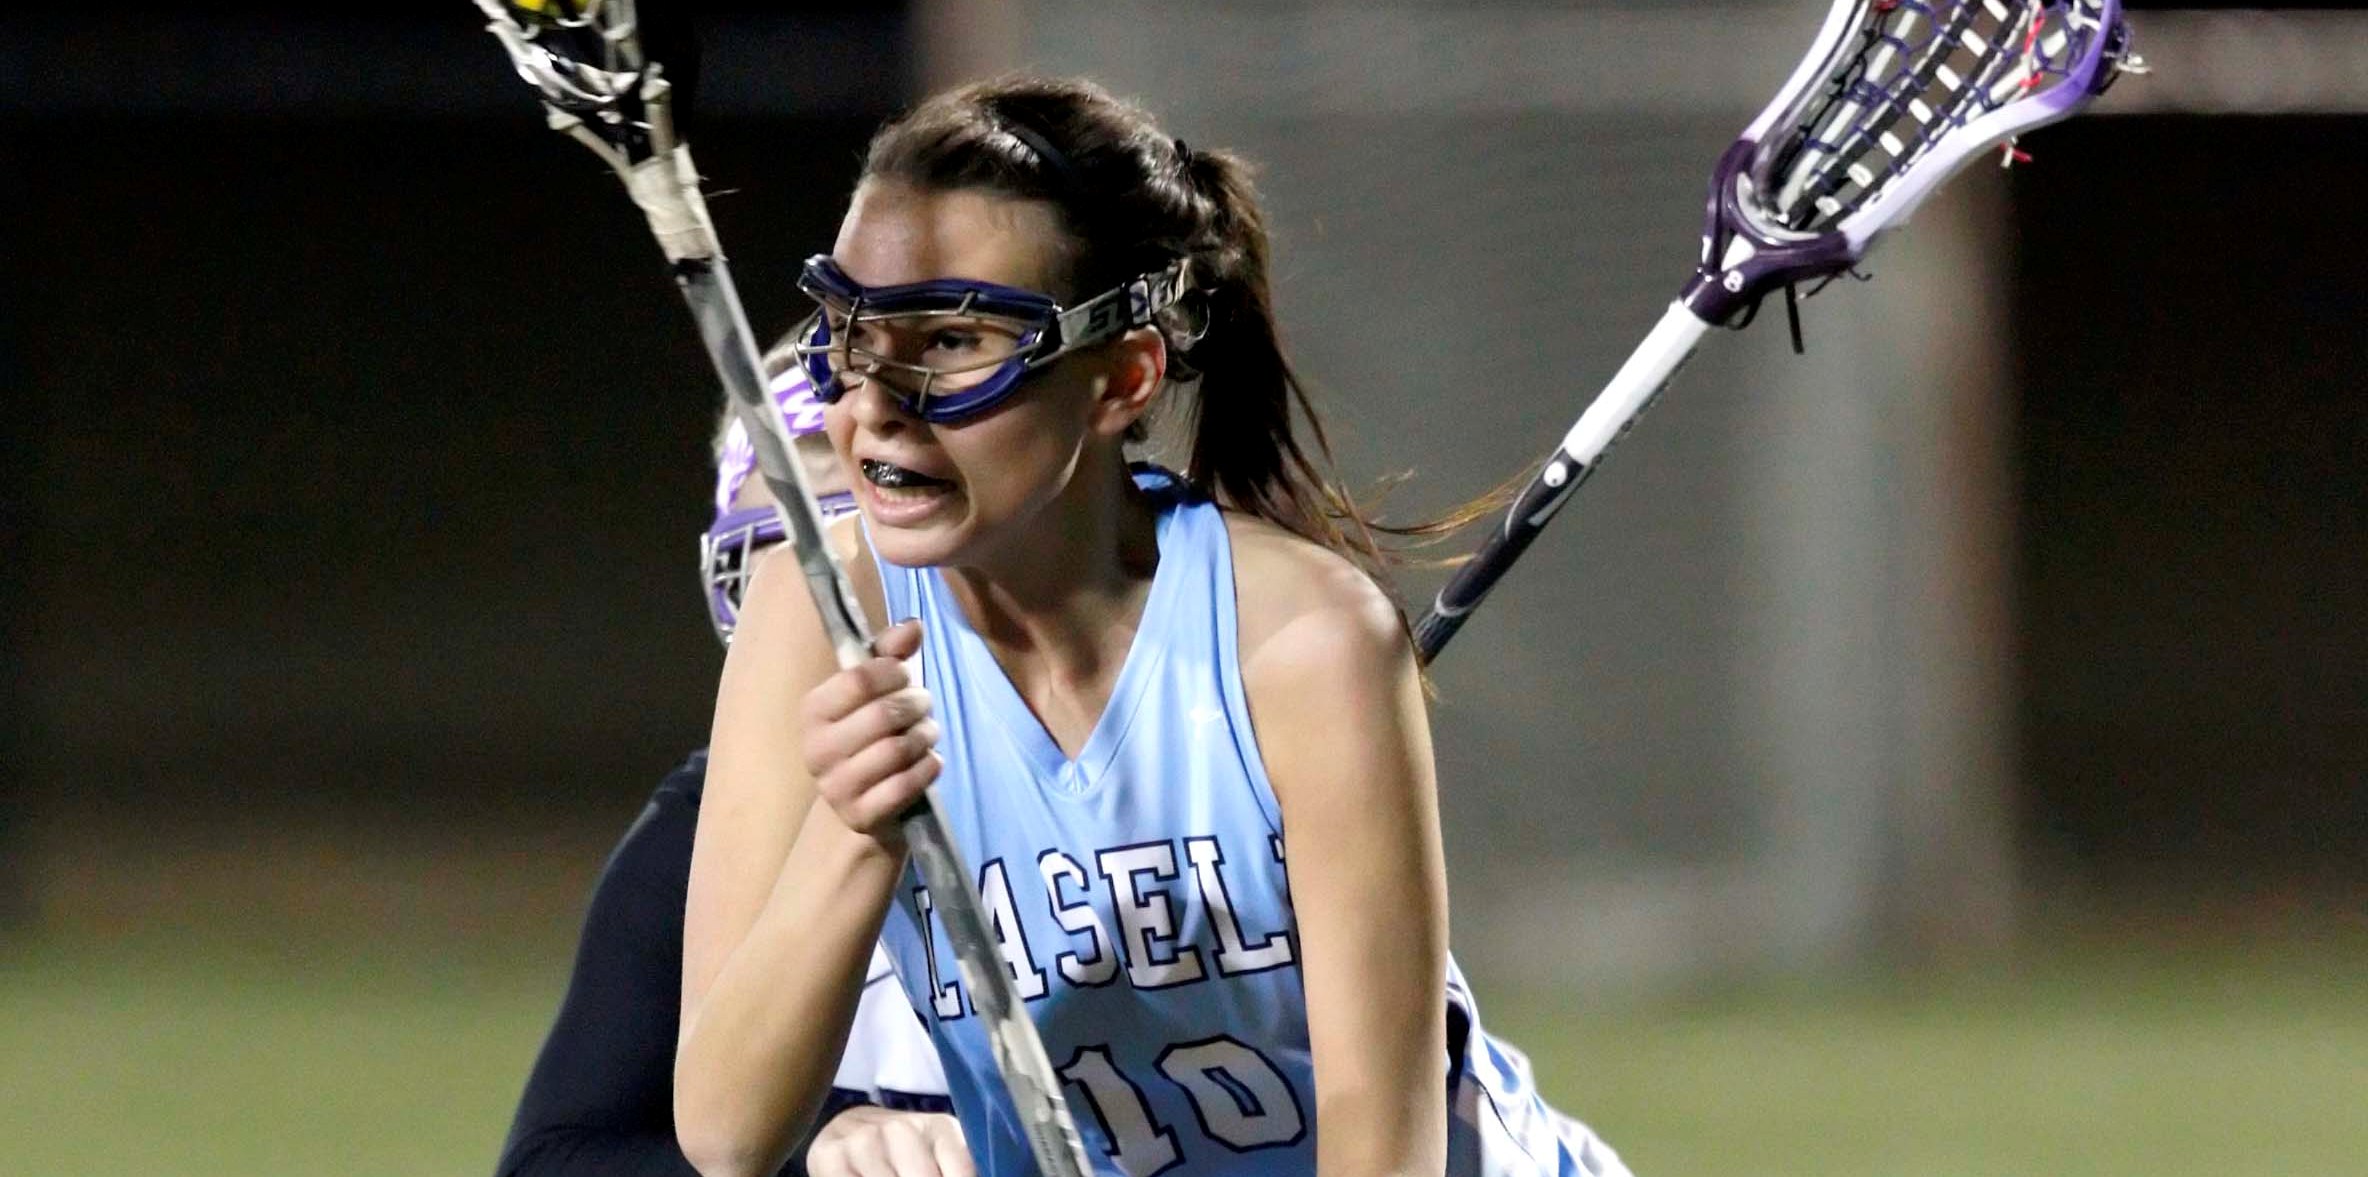 Lasell Heading to GNAC Women’s Lacrosse Final after 21-10 victory over St. Joseph’s of Maine